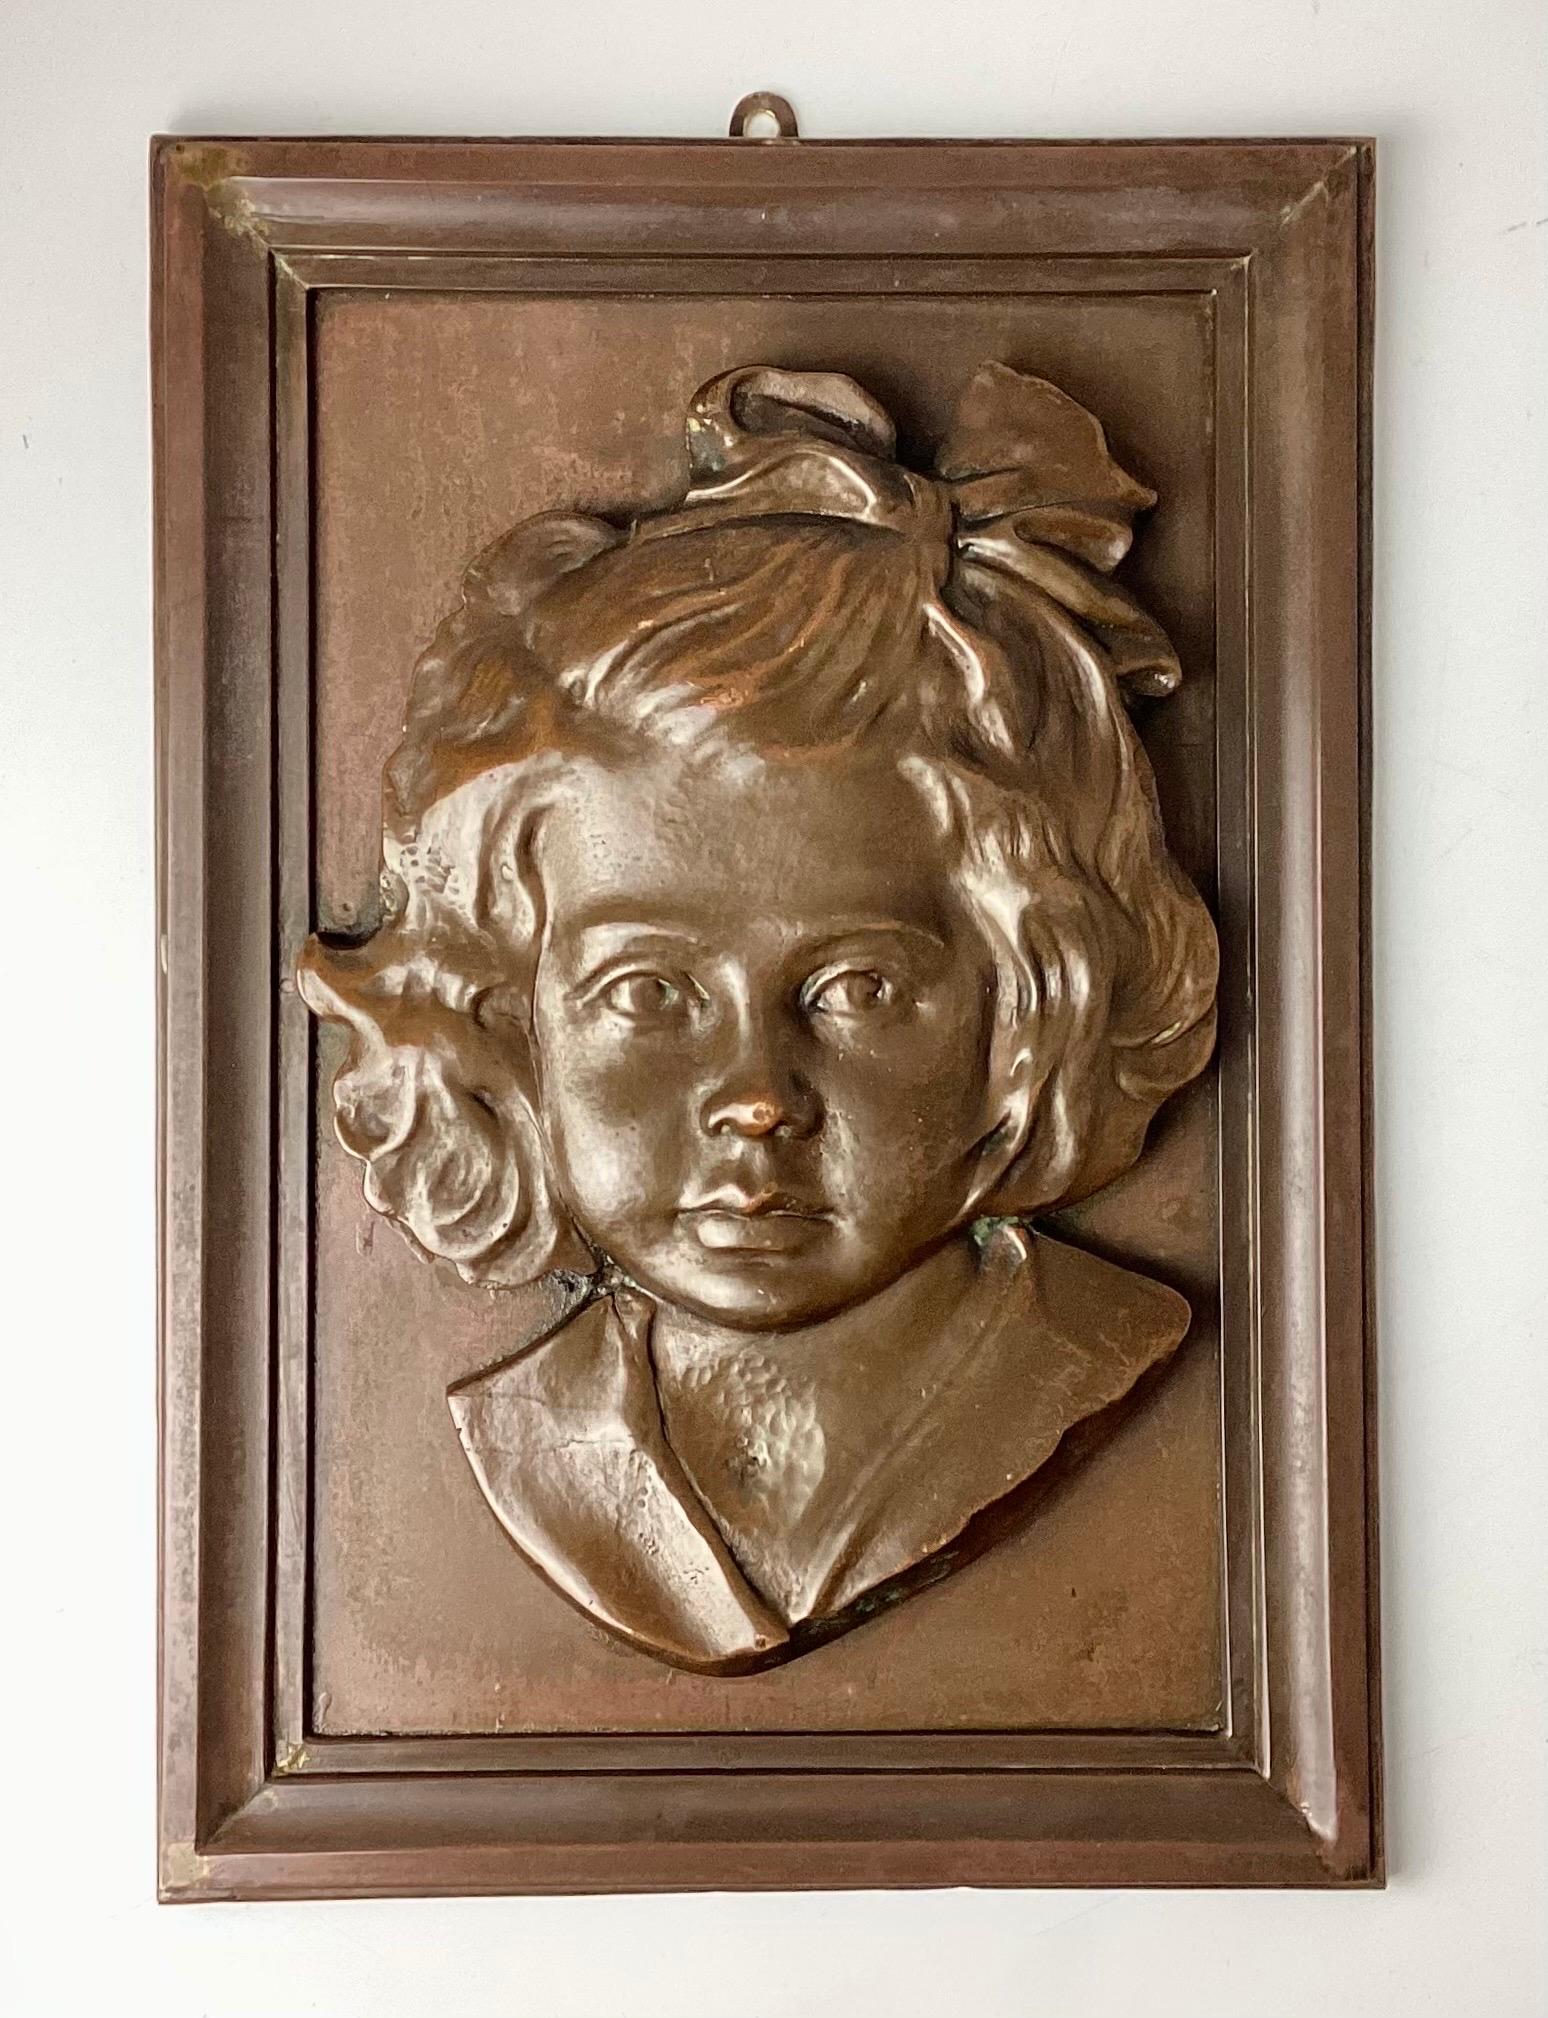 Bronze Portrait Plaque of a Young Girl. She is made of bronze and mounted on a bronze frame. No markings. Well done. Hook was added and not included in measurements.